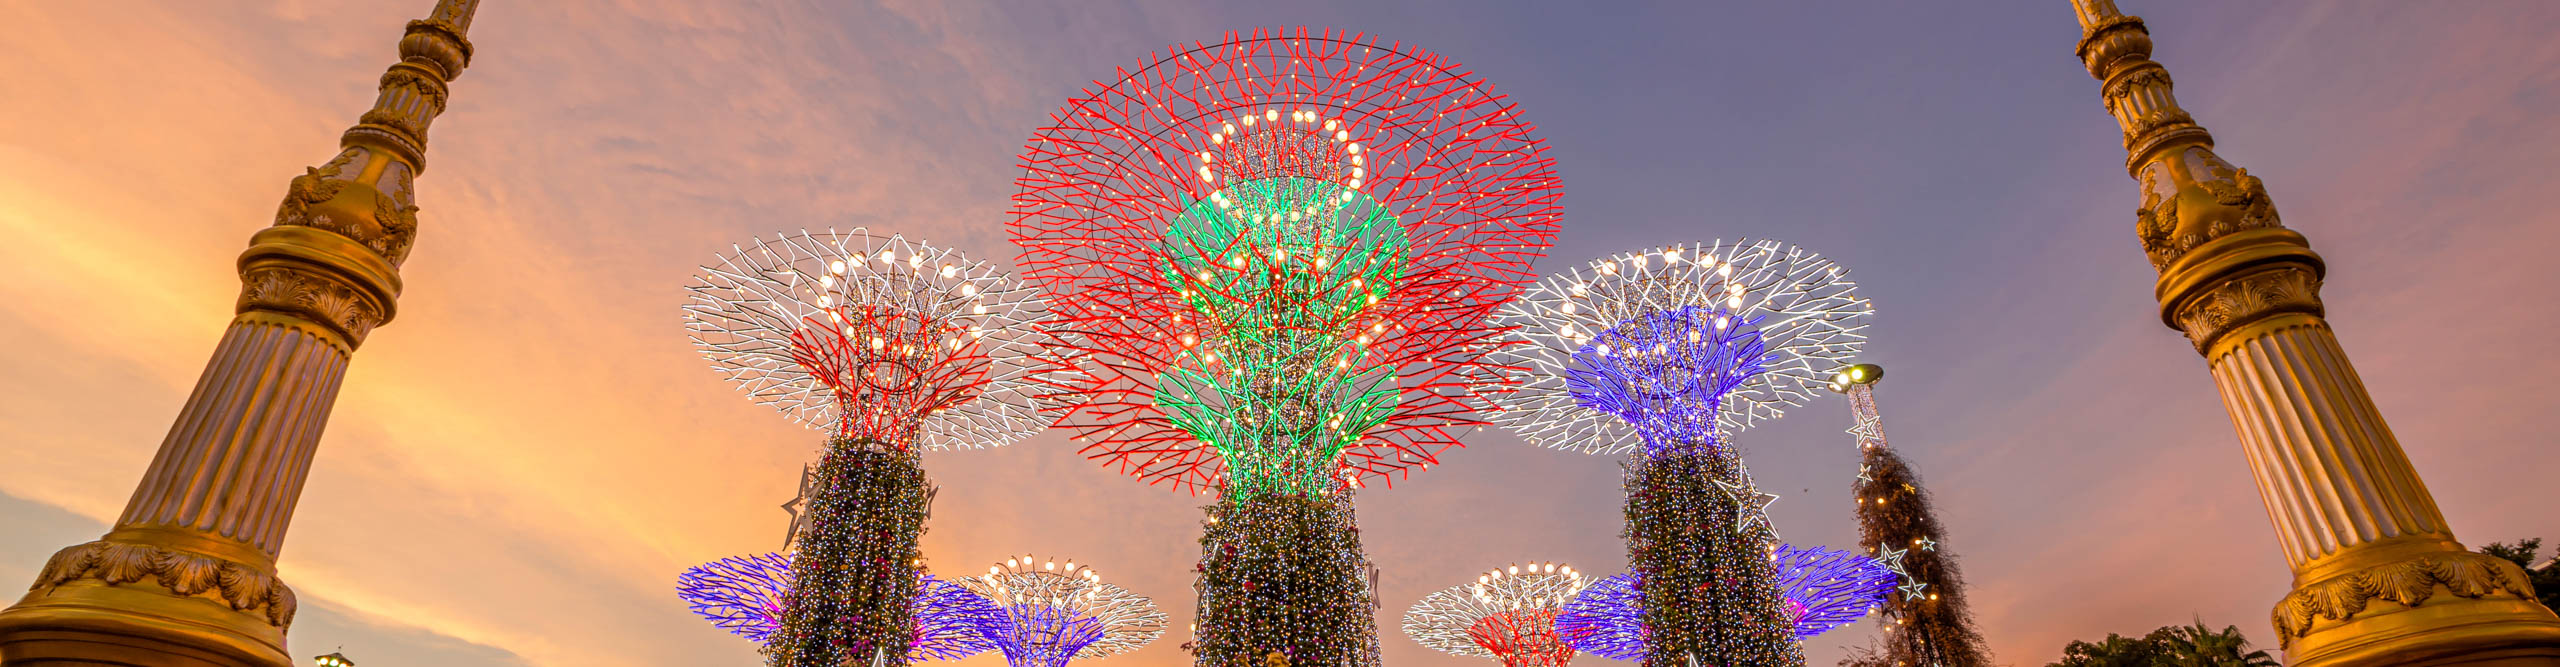 The colourful lights of the Supertree Grove in Gardens by the Bay at twilight time, Singapore